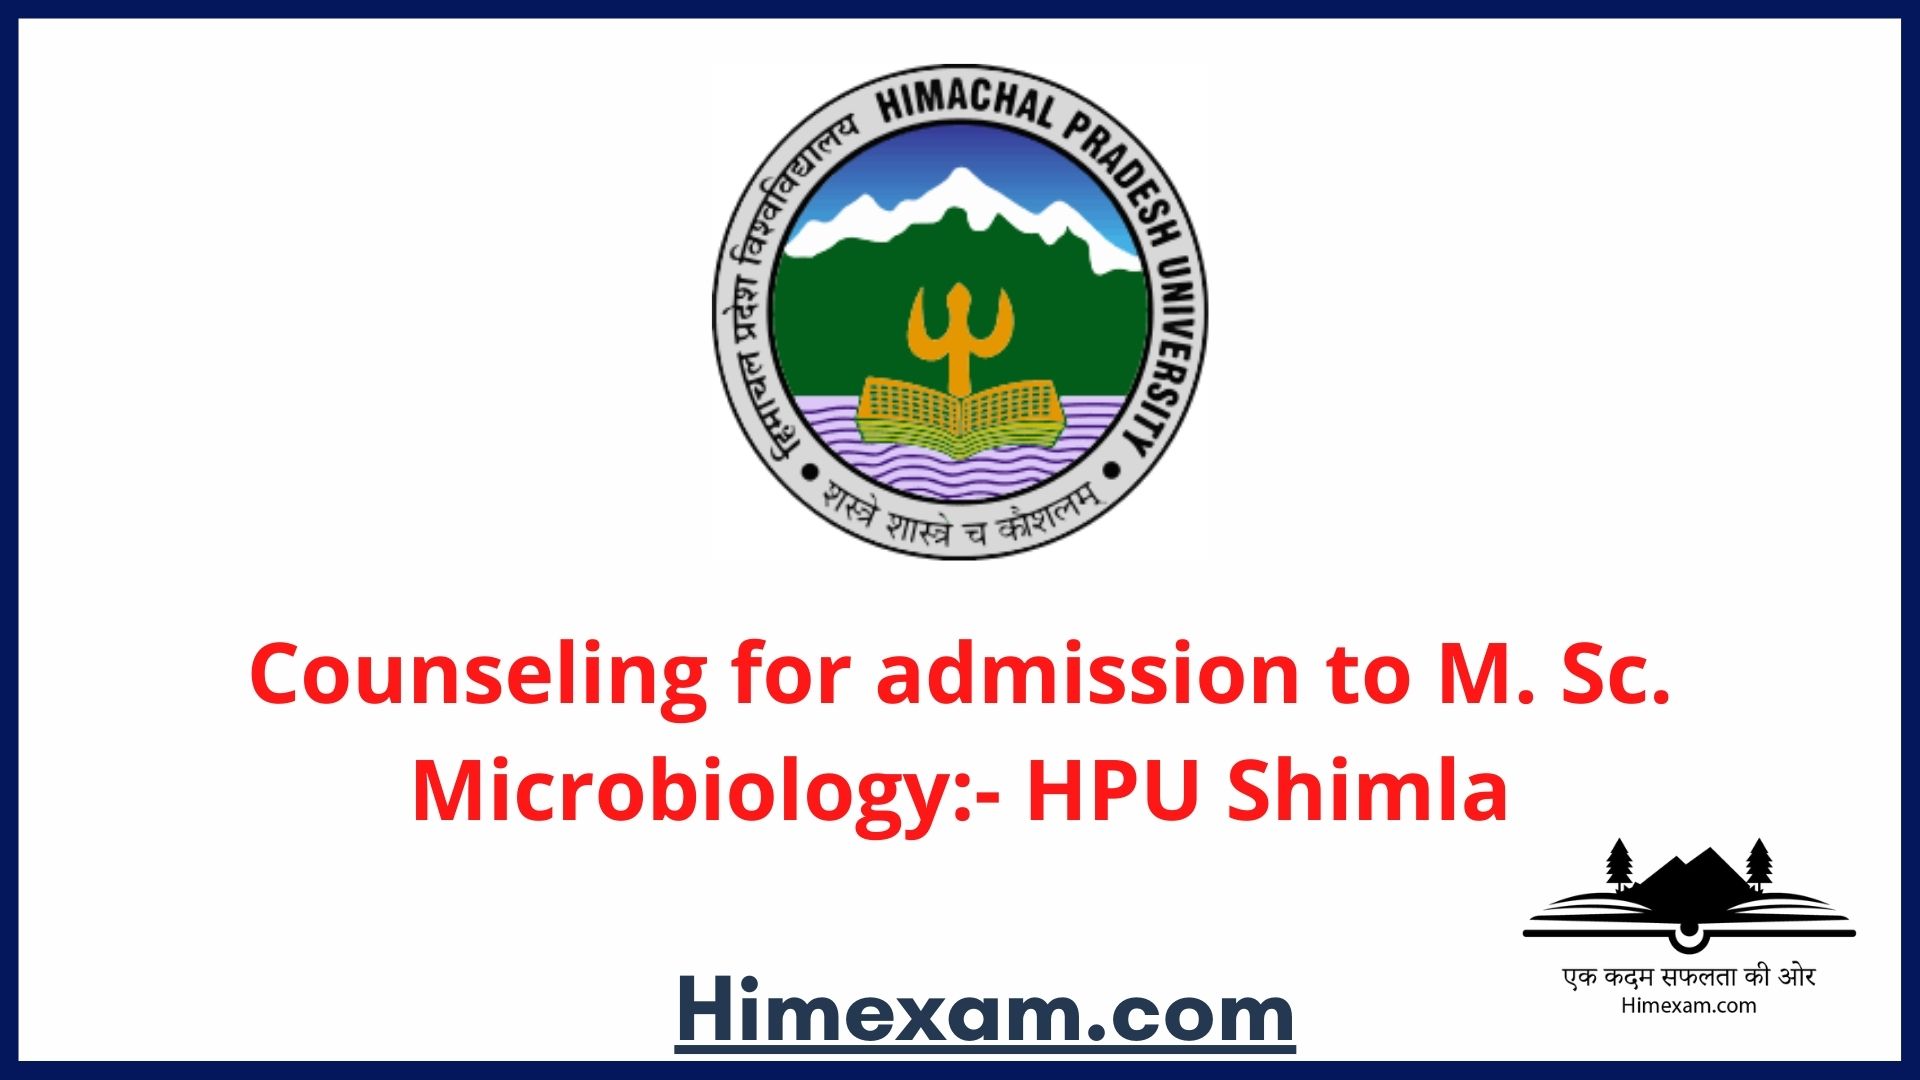 Counseling for admission to M. Sc. Microbiology:- HPU Shimla